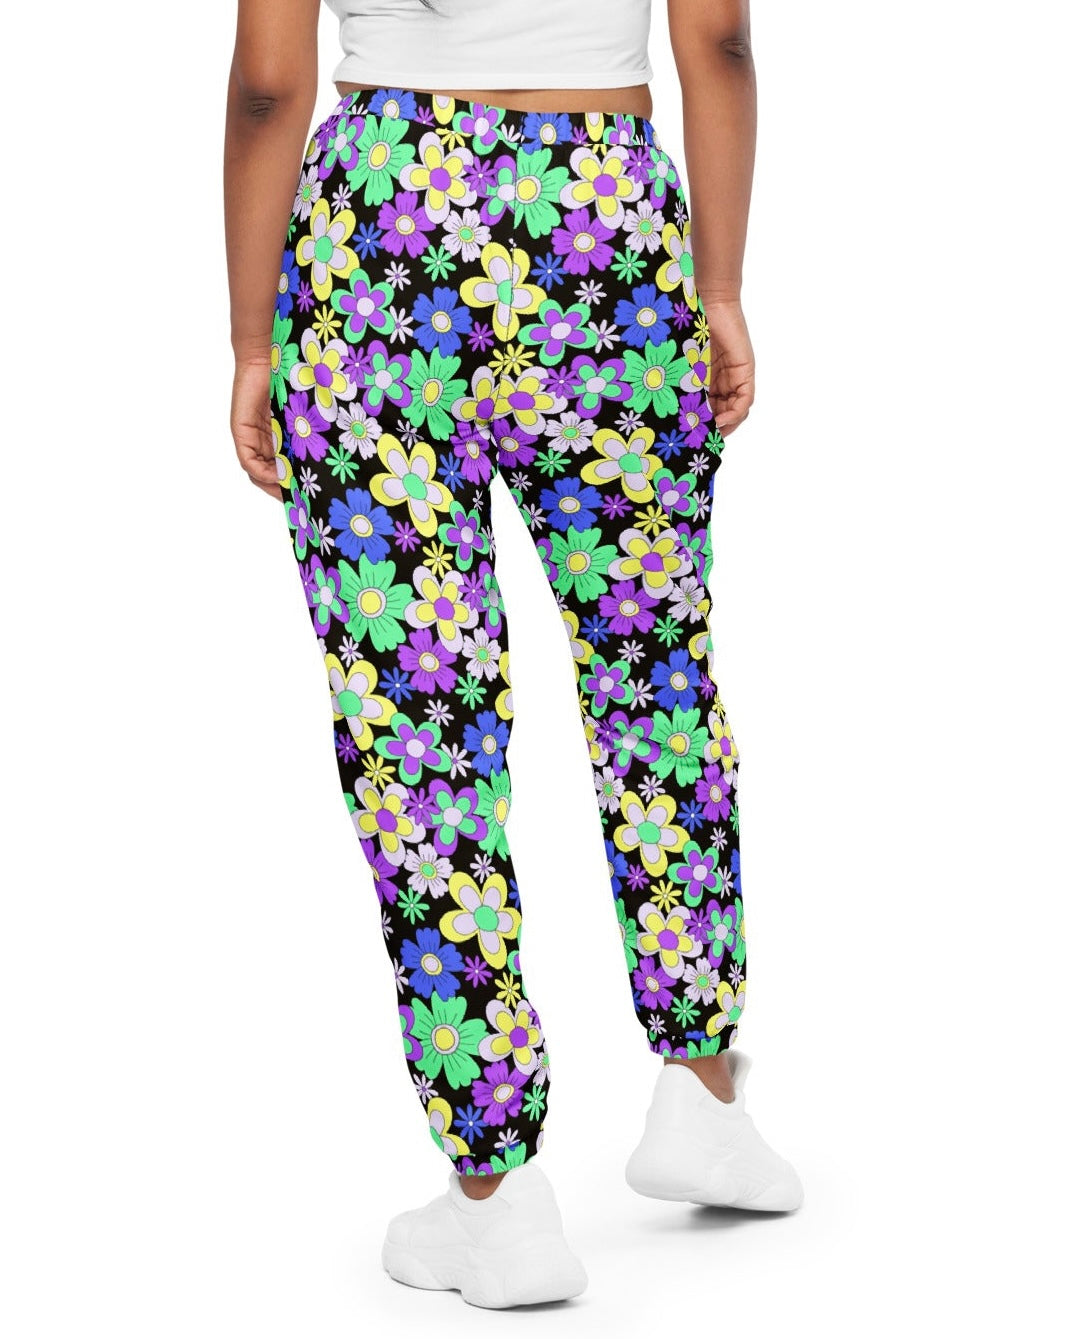 Crazy Daisy Track Pants, Track Pants, - One Stop Rave